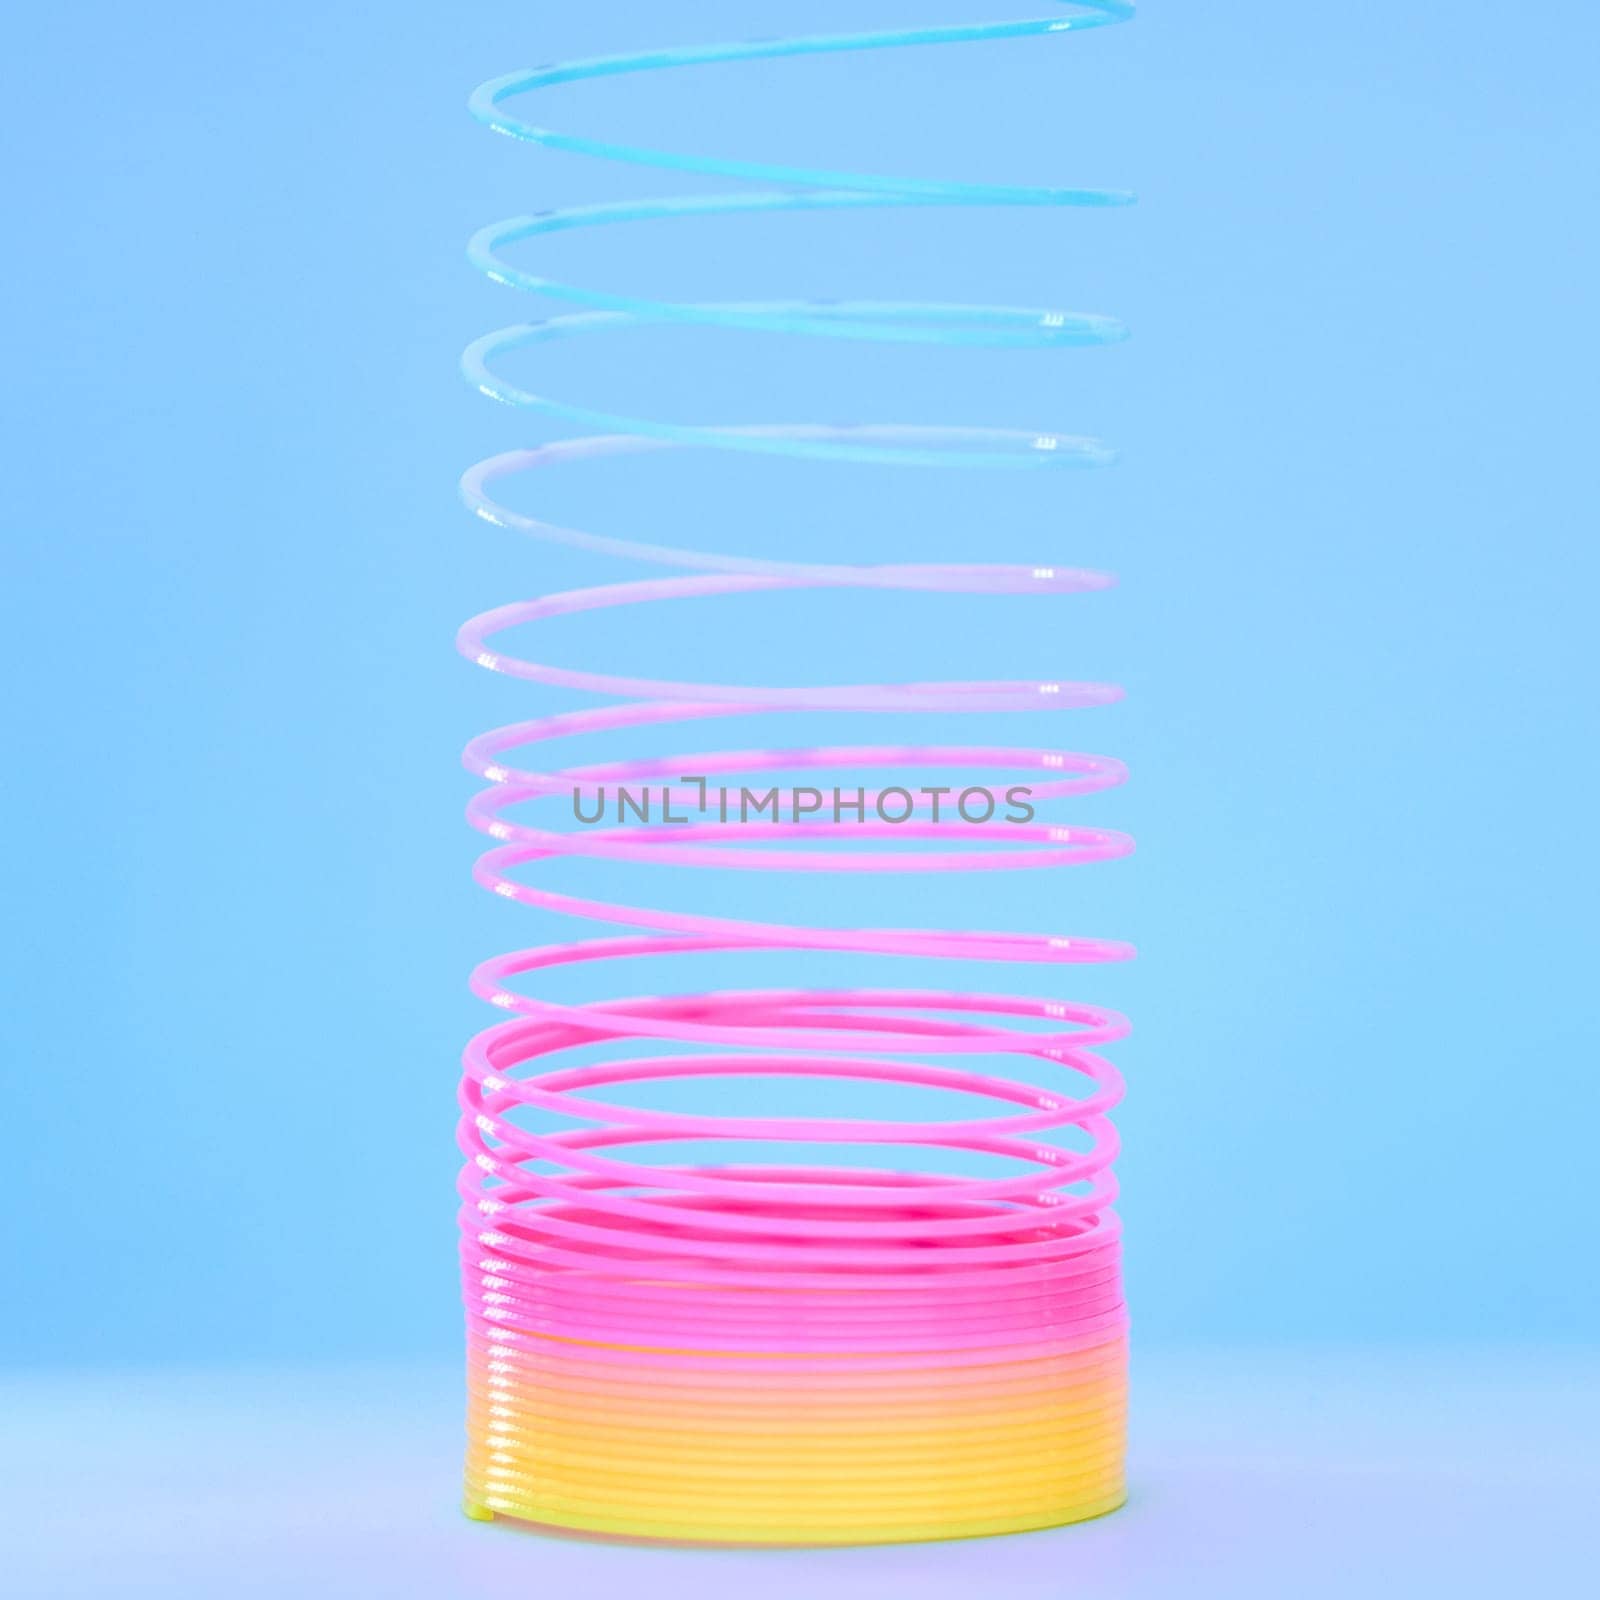 Rainbow slinky toy, spring and plastic product in studio isolated against a blue background mockup. Flexible toys, colorful spirals and childhood item stretched out for playing, having fun and games